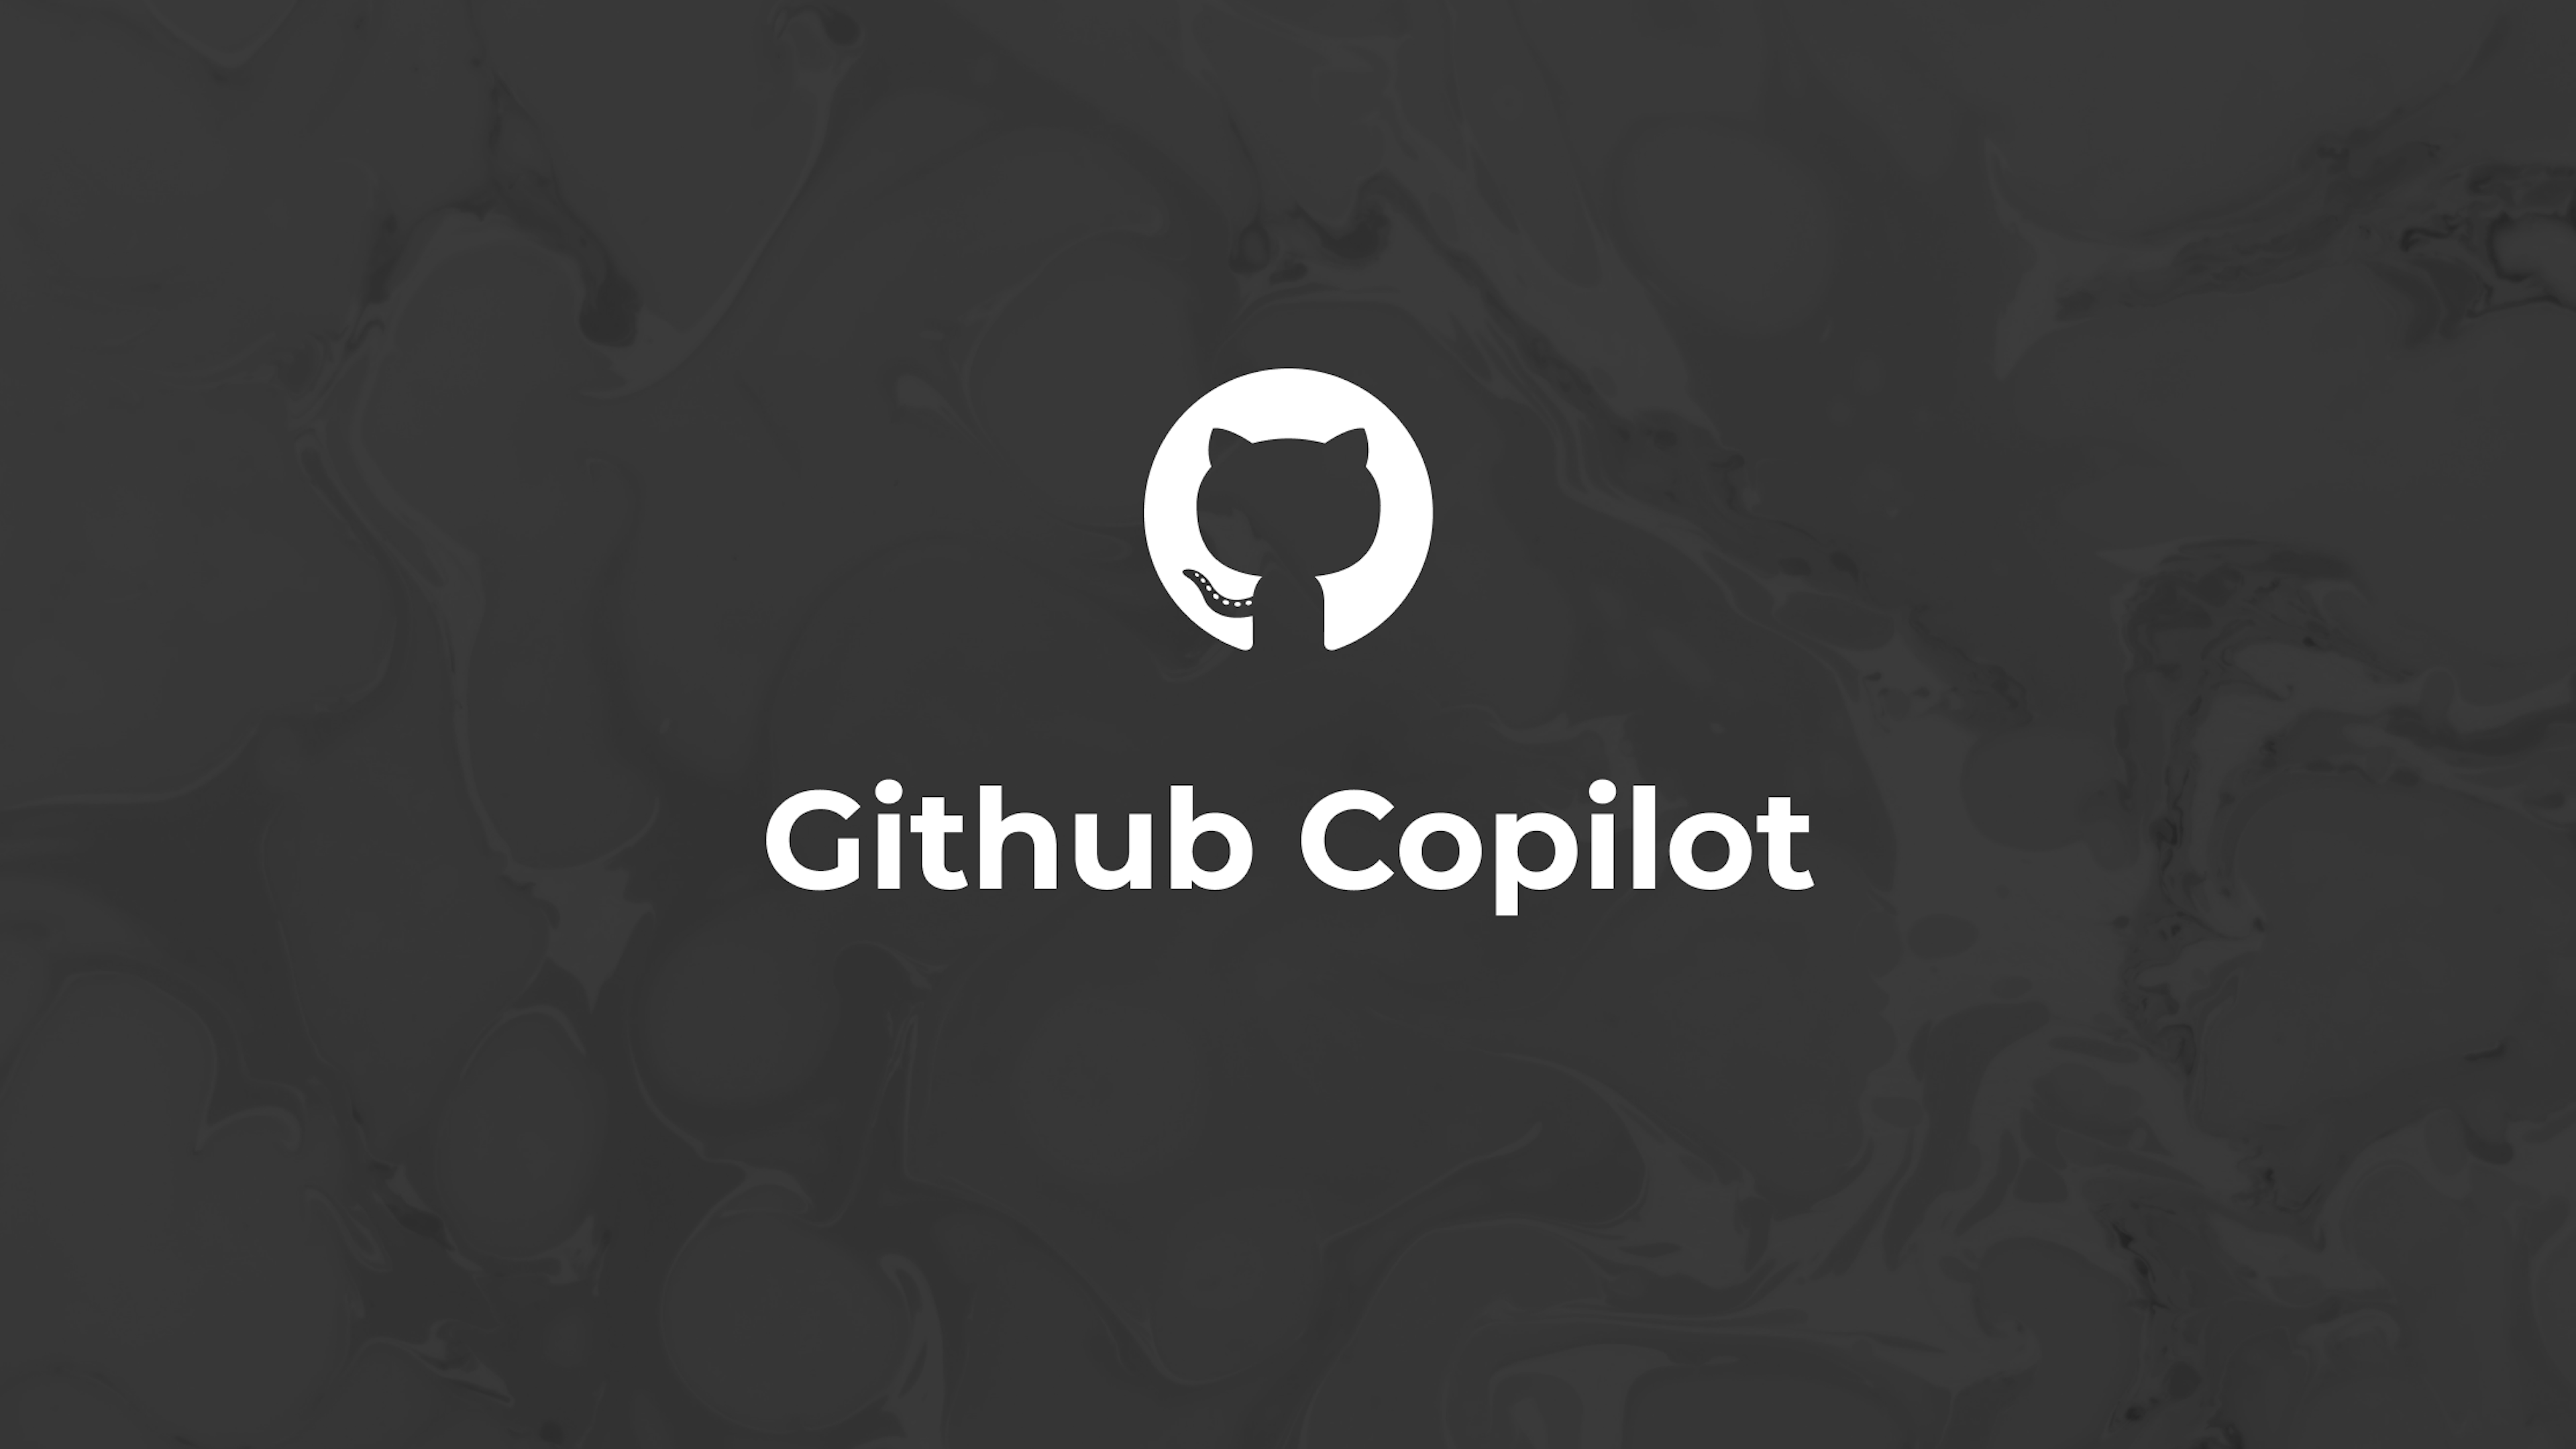 What I don't like about Github Copilot